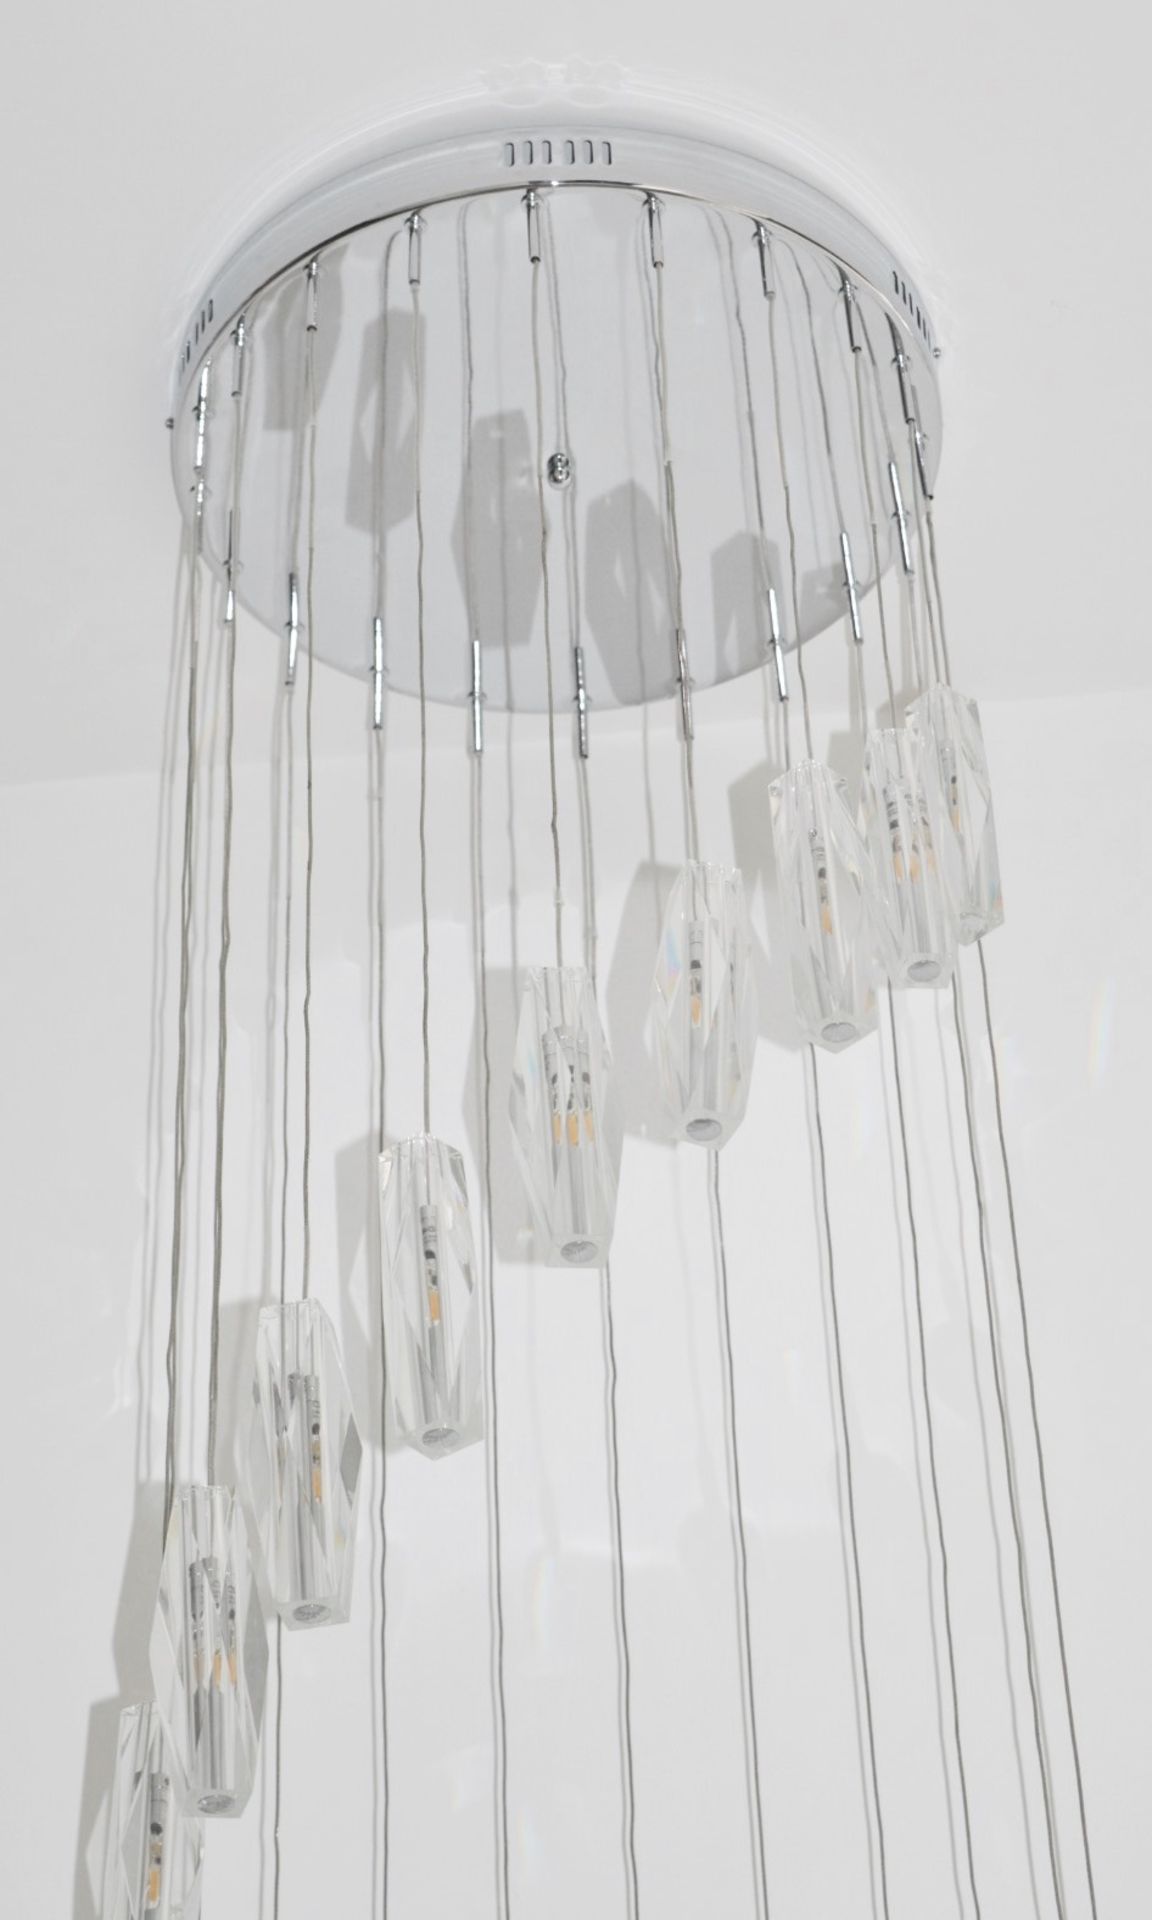 1 x Sculptured Ice Chrome 20 Light Dingle Dangle Pendant With Crystal Glass - RRP £792.00 - Image 4 of 6